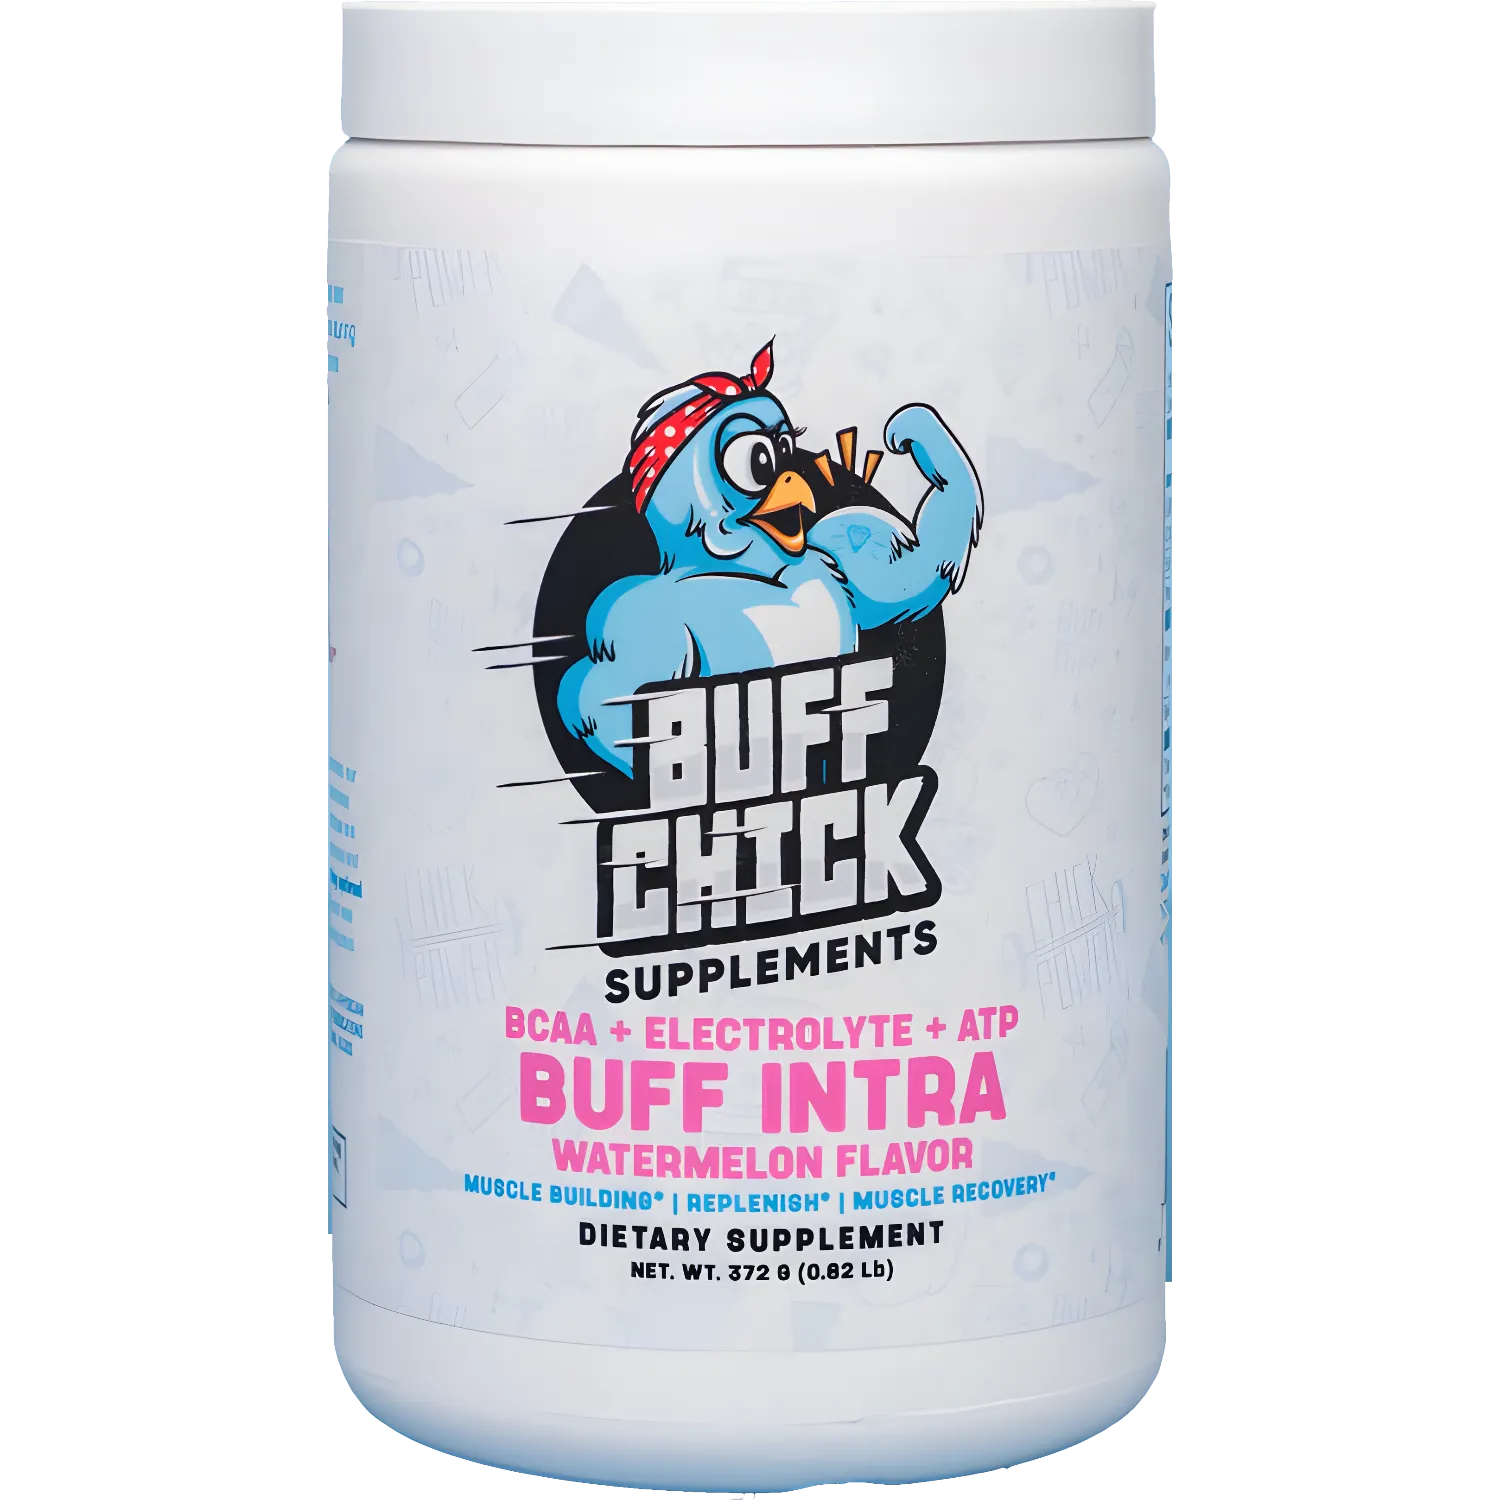 Free Buff Chick Supplements Sample Pack